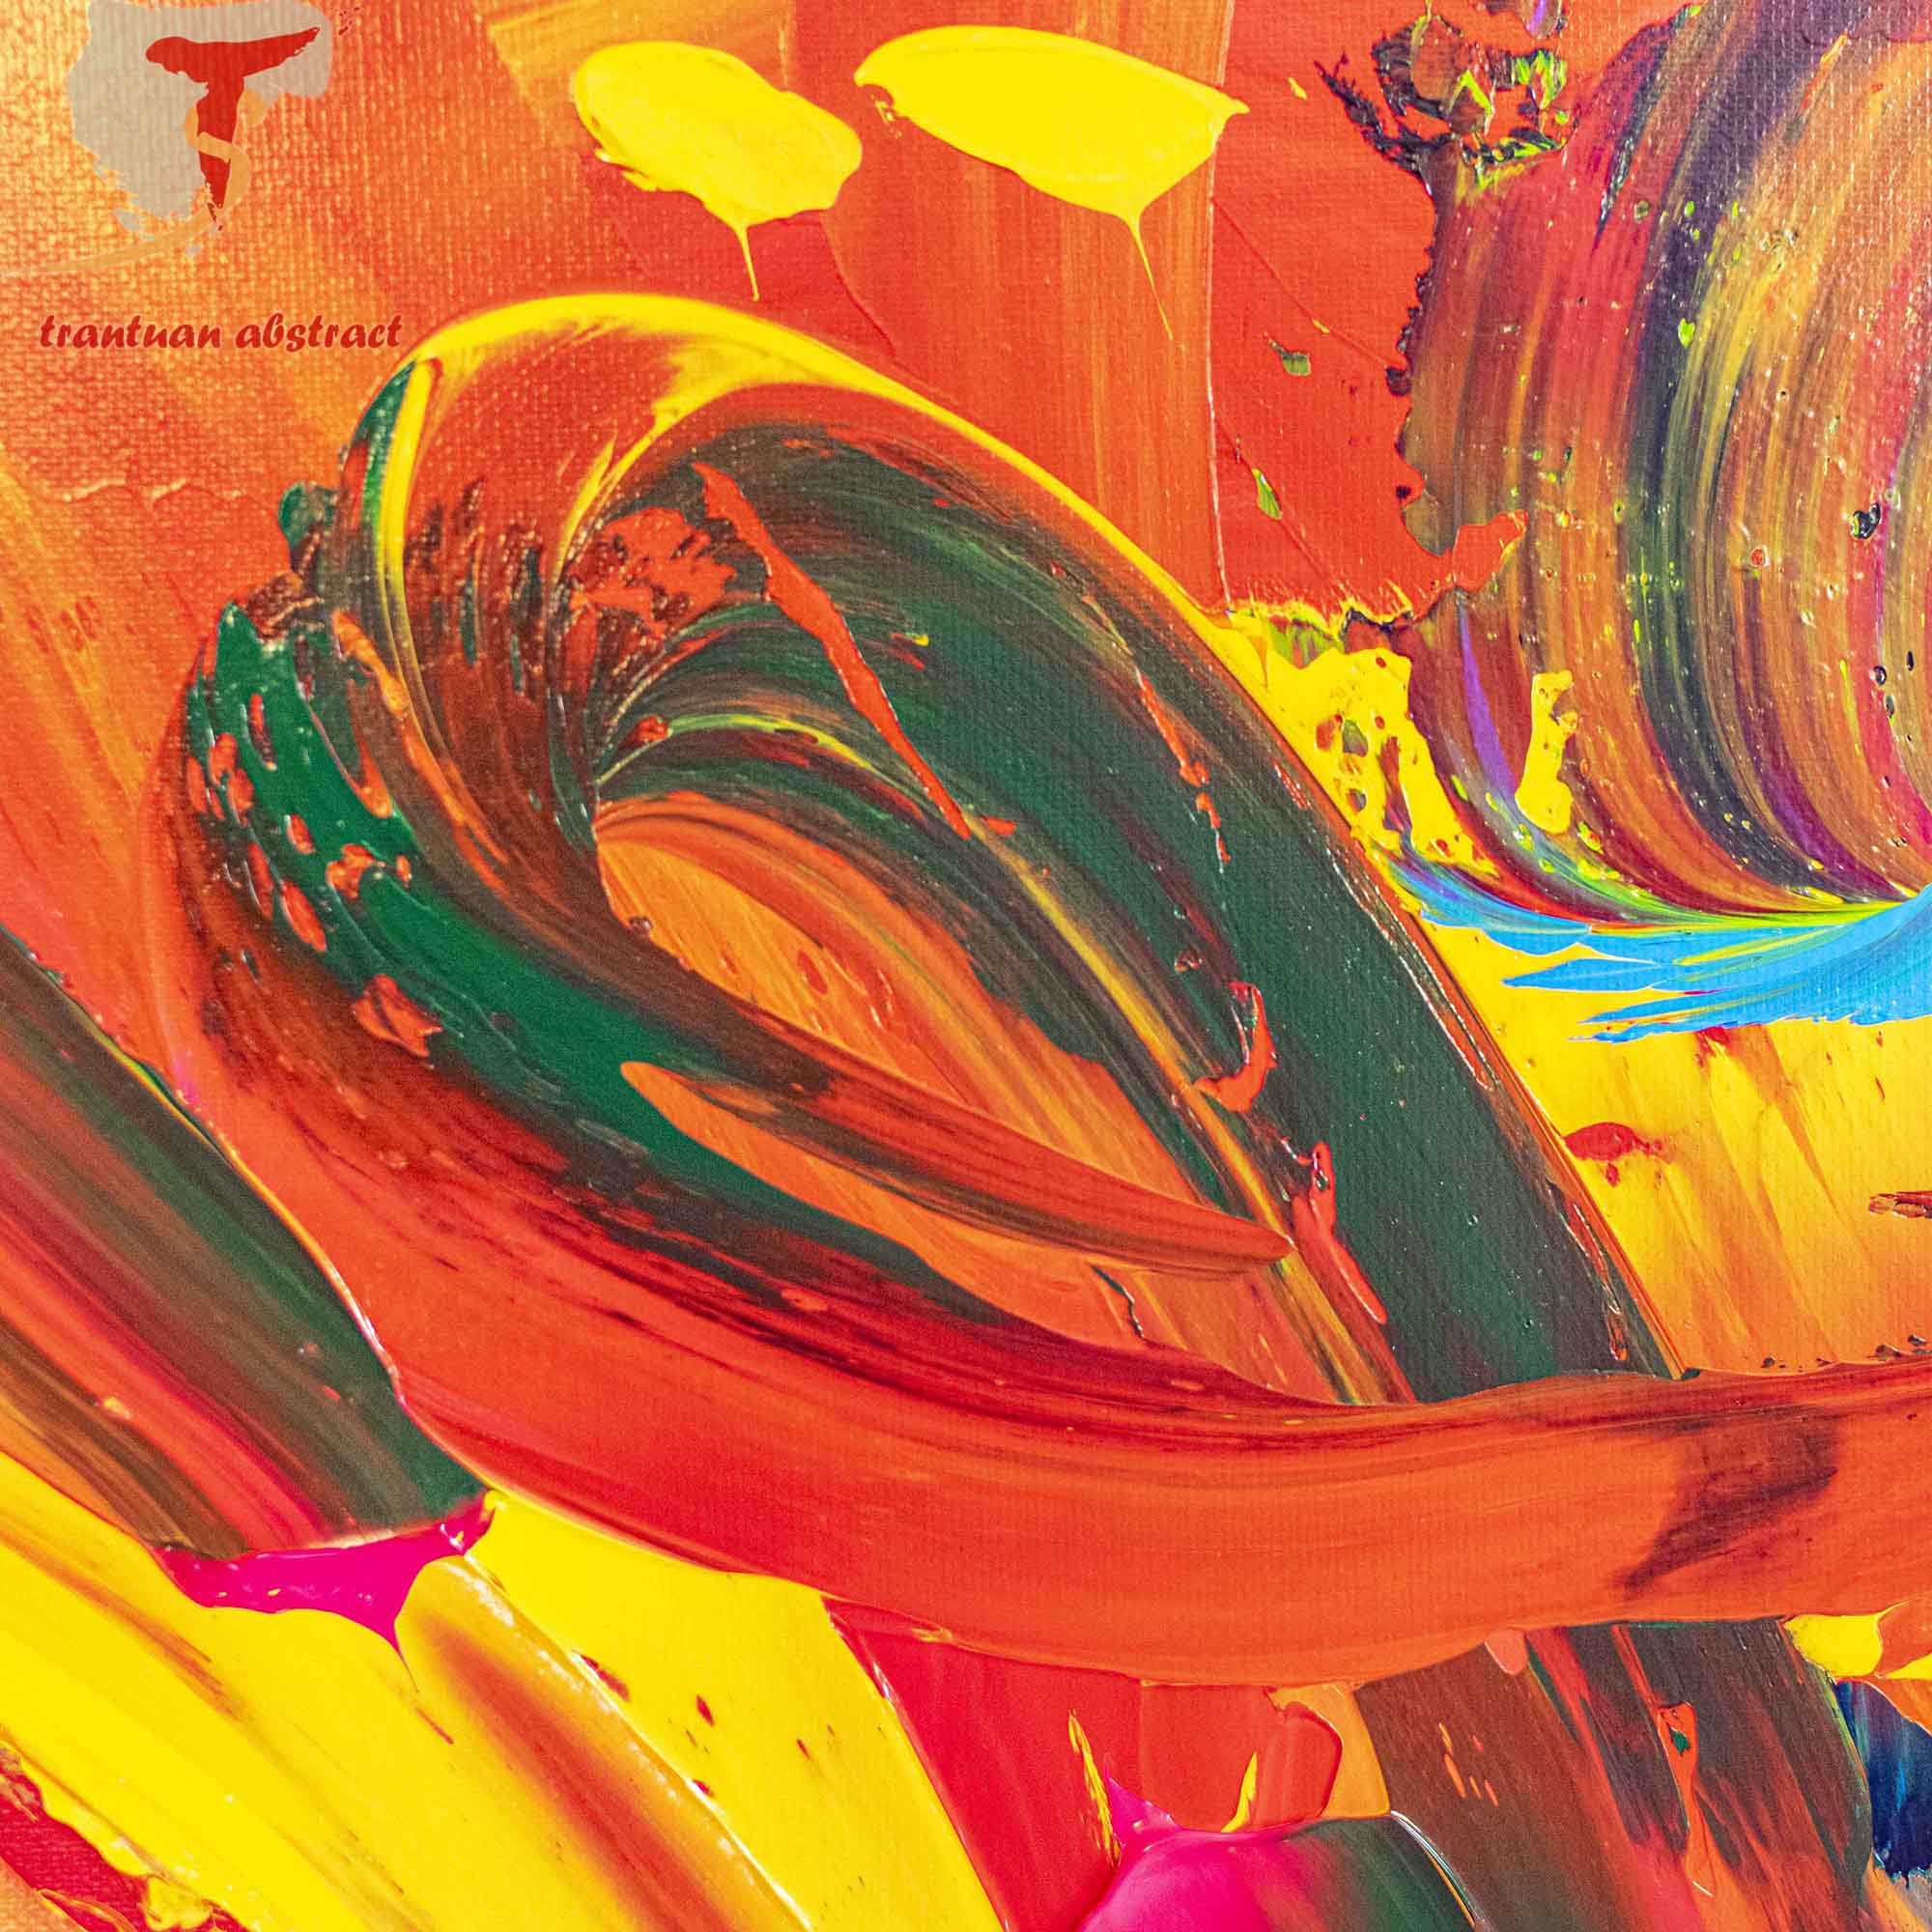 Tran Tuan Abstract Bright Emotion 2021 120 x 100 x 5 cm Acrylic on Canvas Painting Detail s (3)